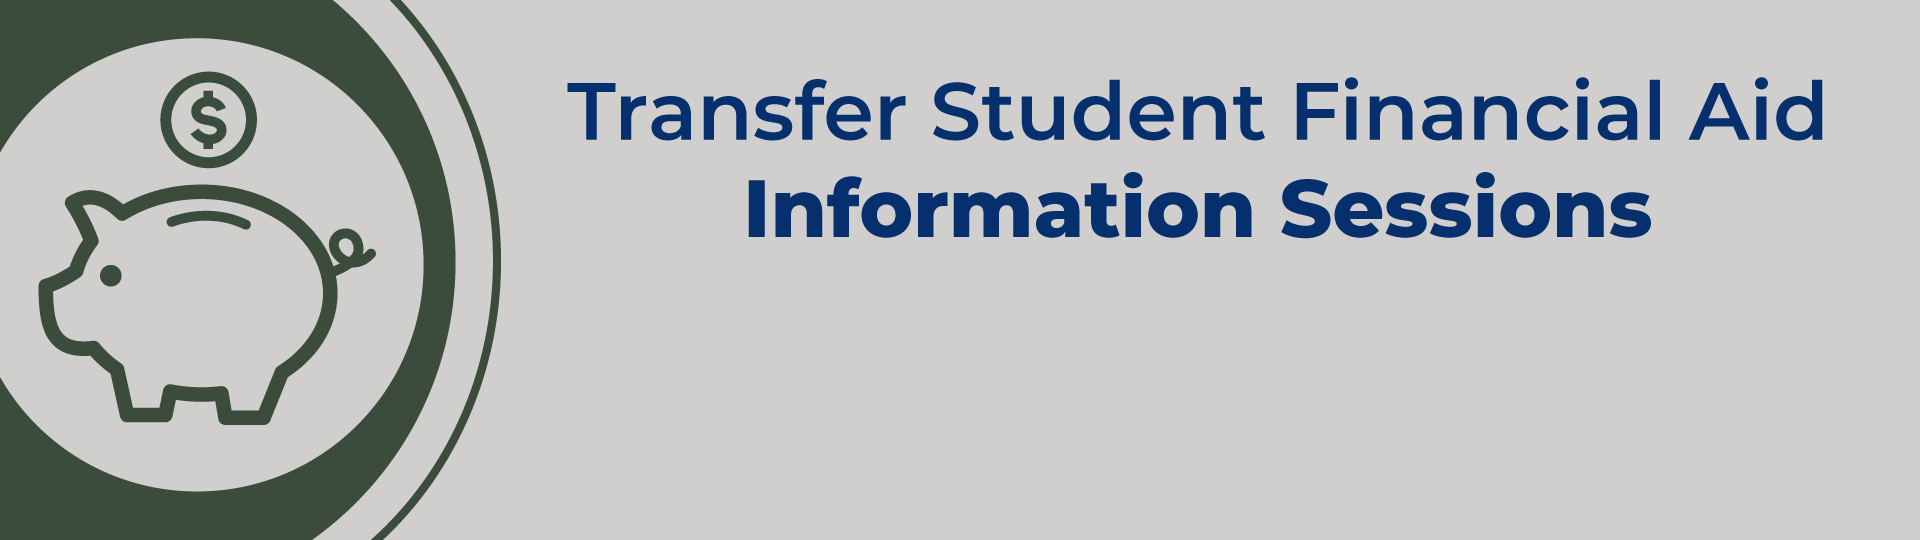 Transfer Financial Aid Information Sessions coming up